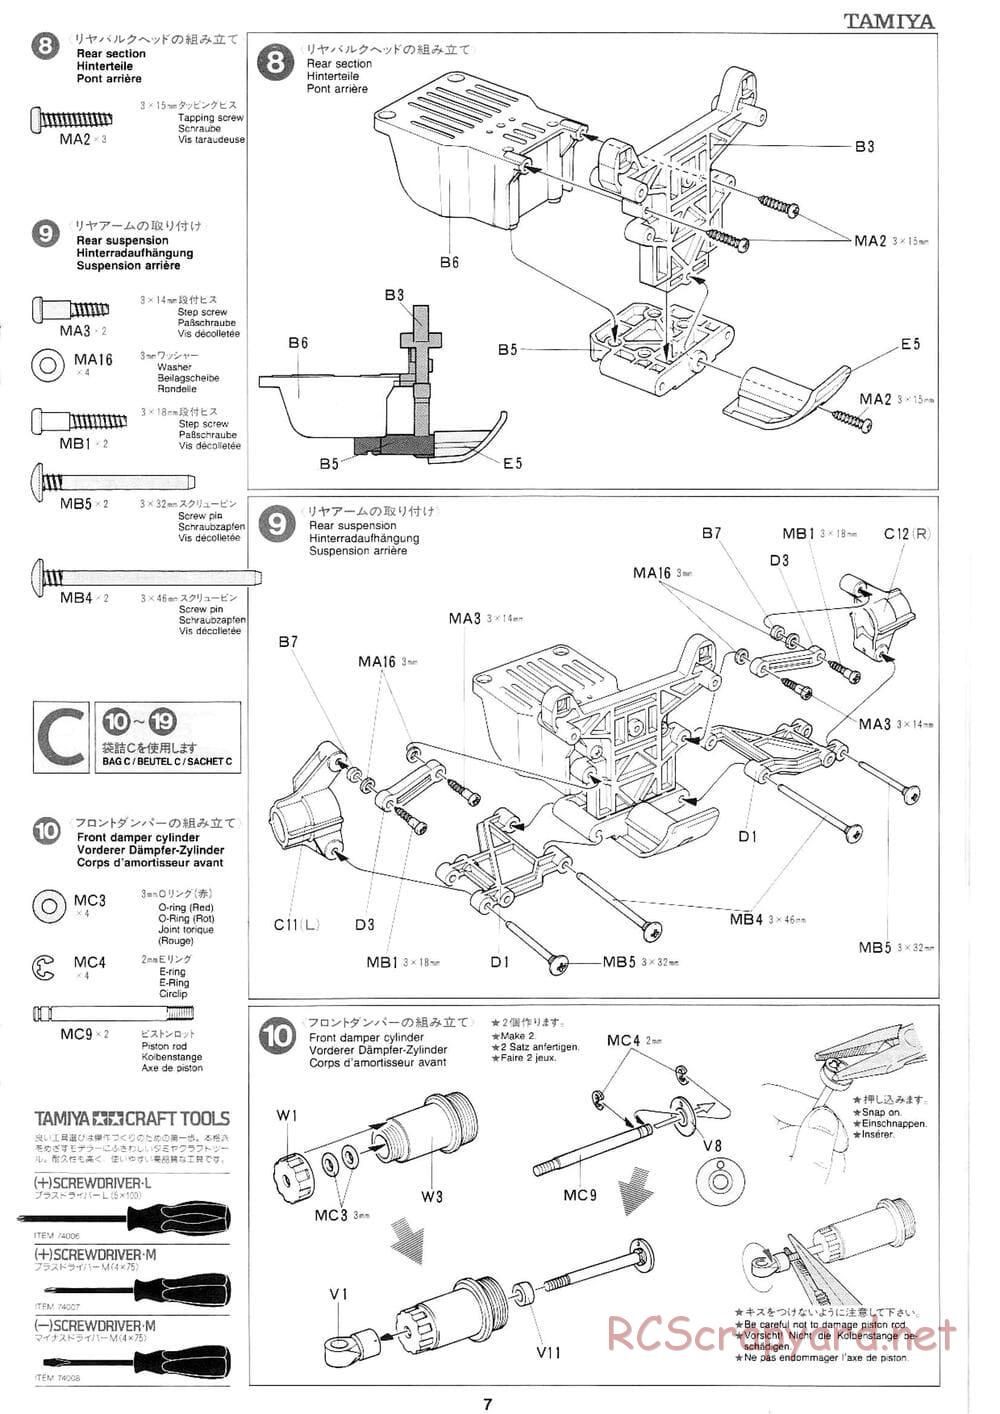 Tamiya - Volkswagen New Beetle - FF-01 Chassis - Manual - Page 5